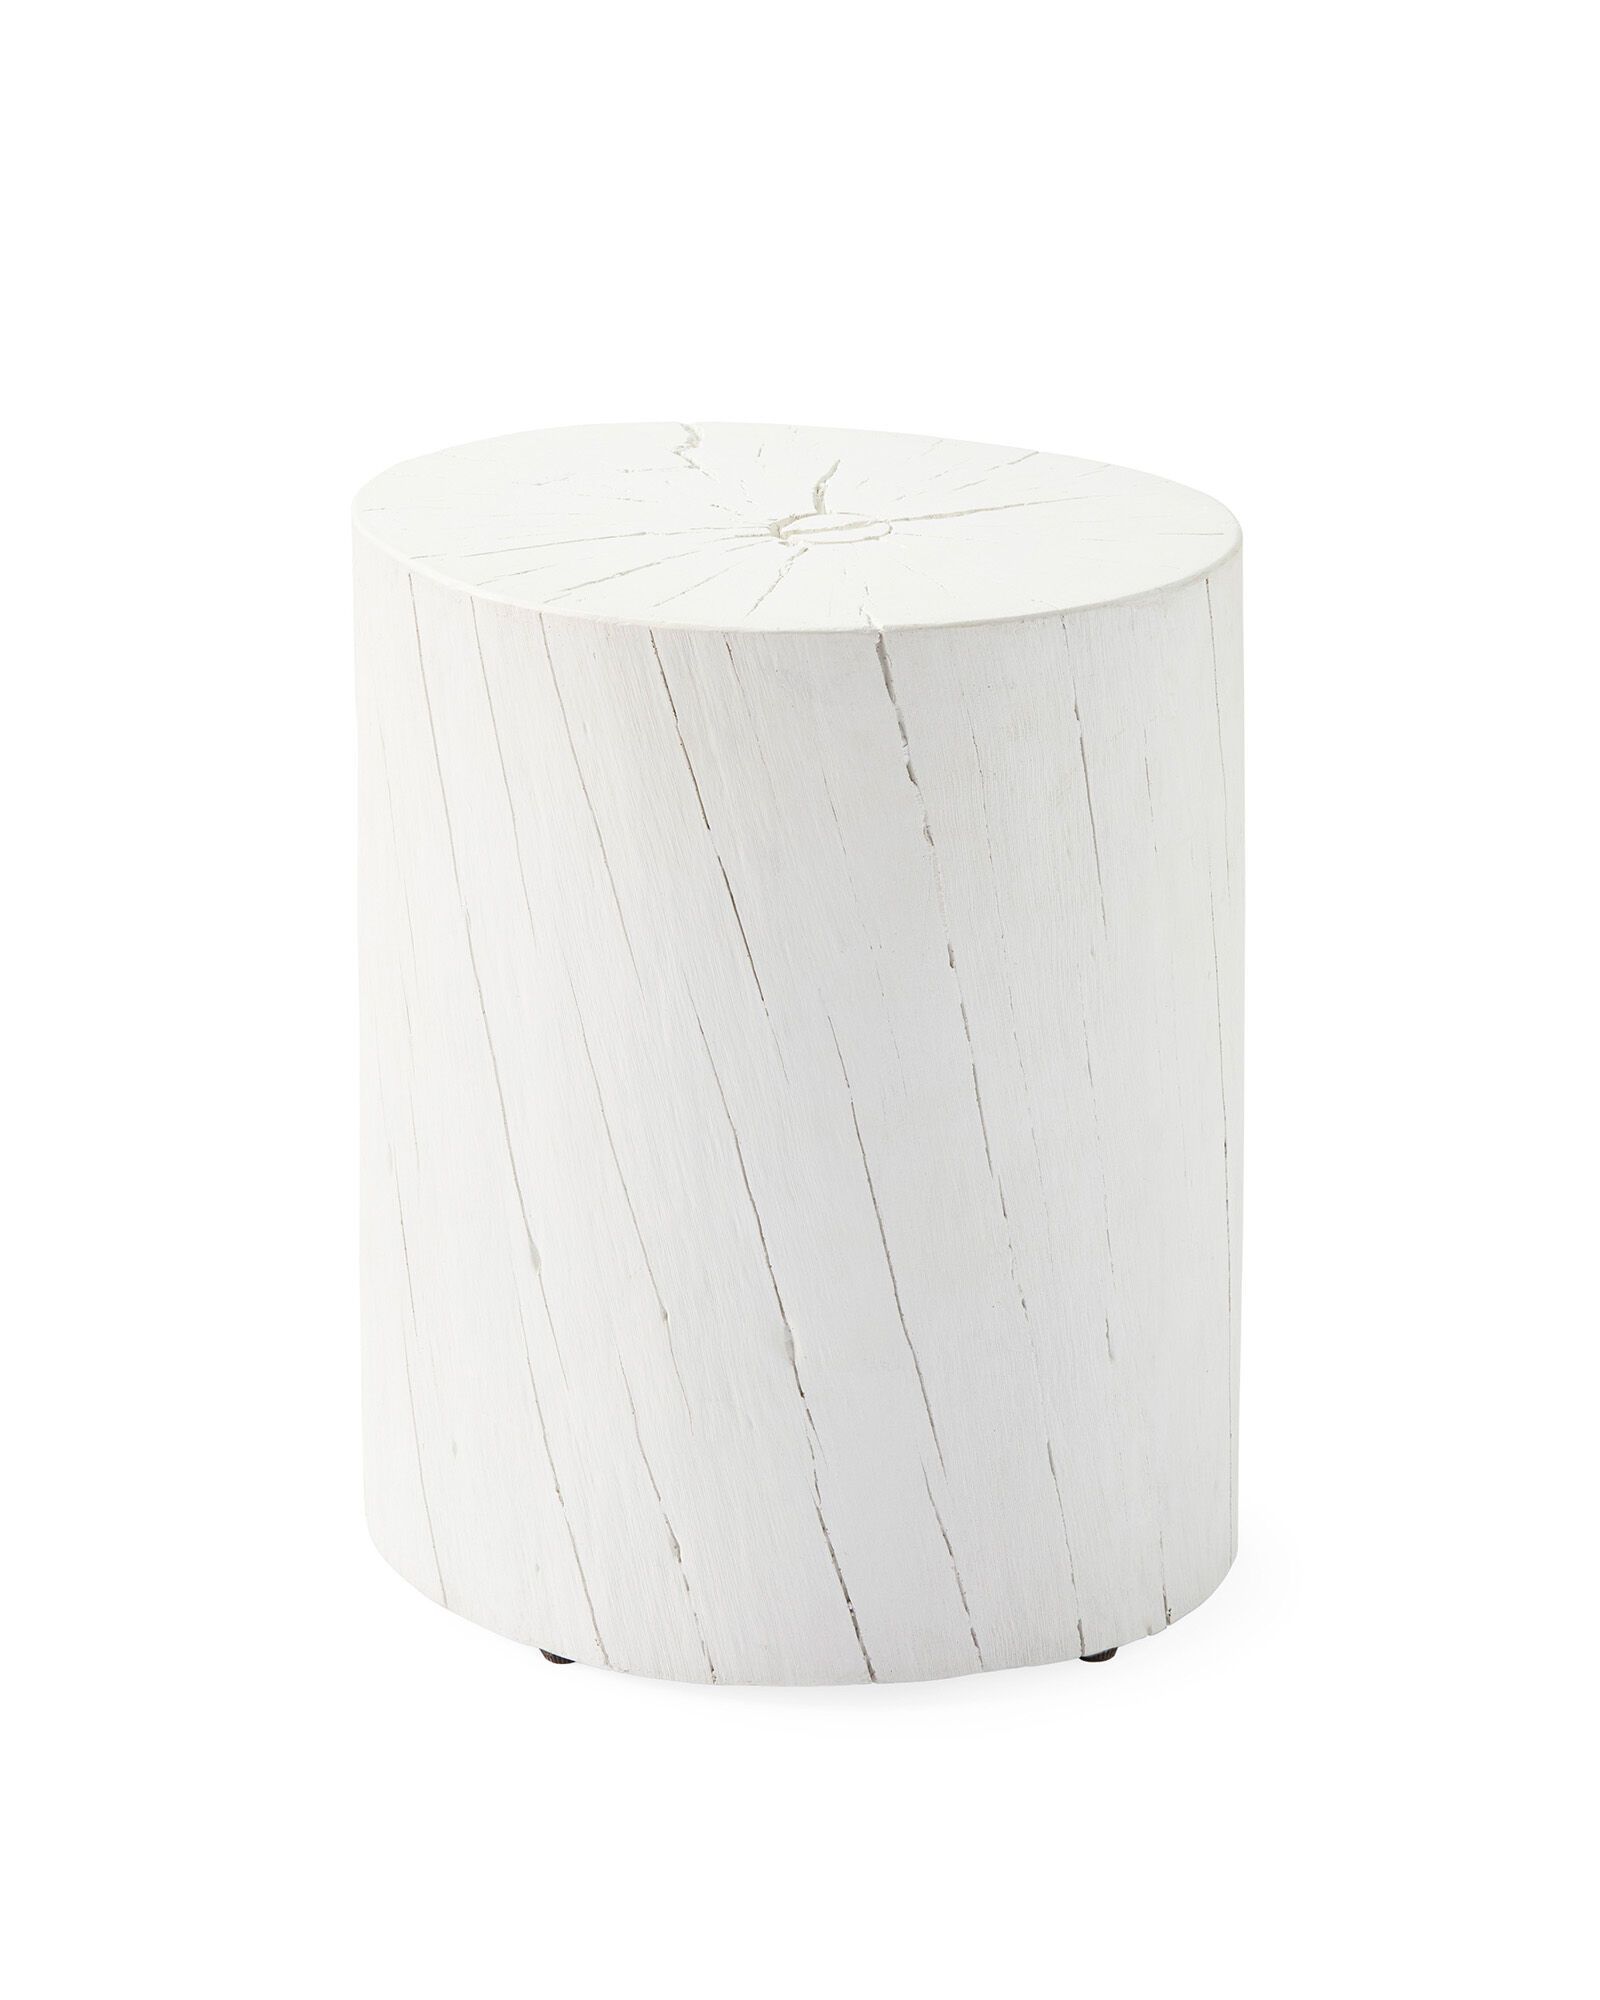 Bayville Side Table | Serena and Lily